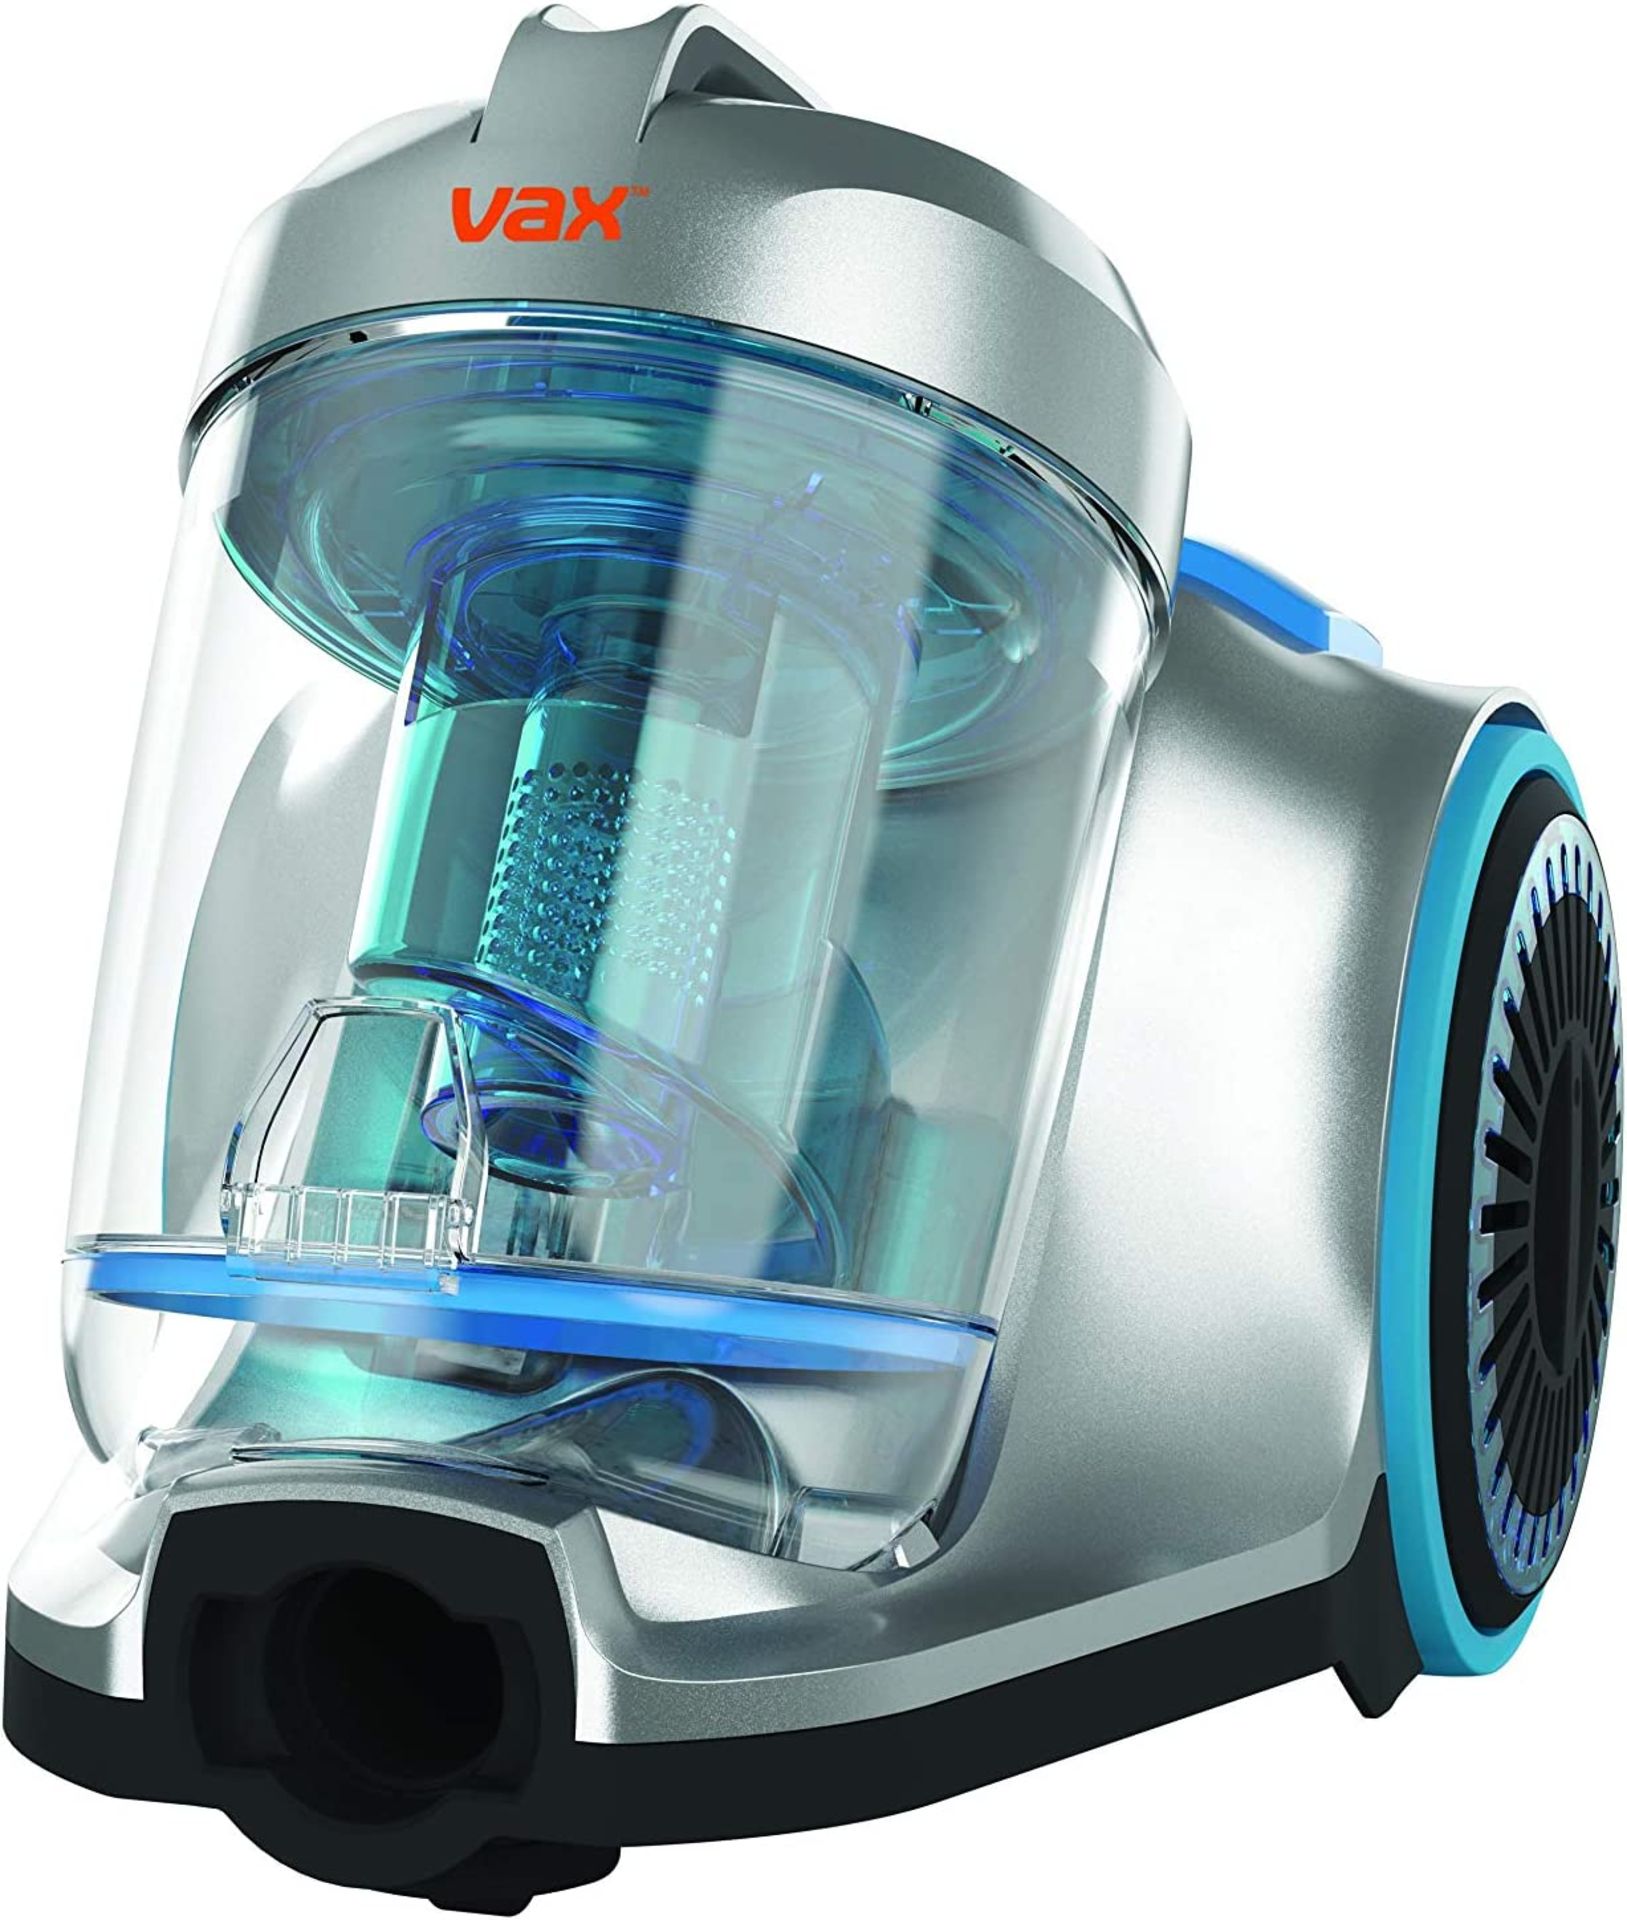 Vax Pick Up Pet Cylinder Vacuum Cleaner | Compact design, with enhanced HEPA filtration | Ideal